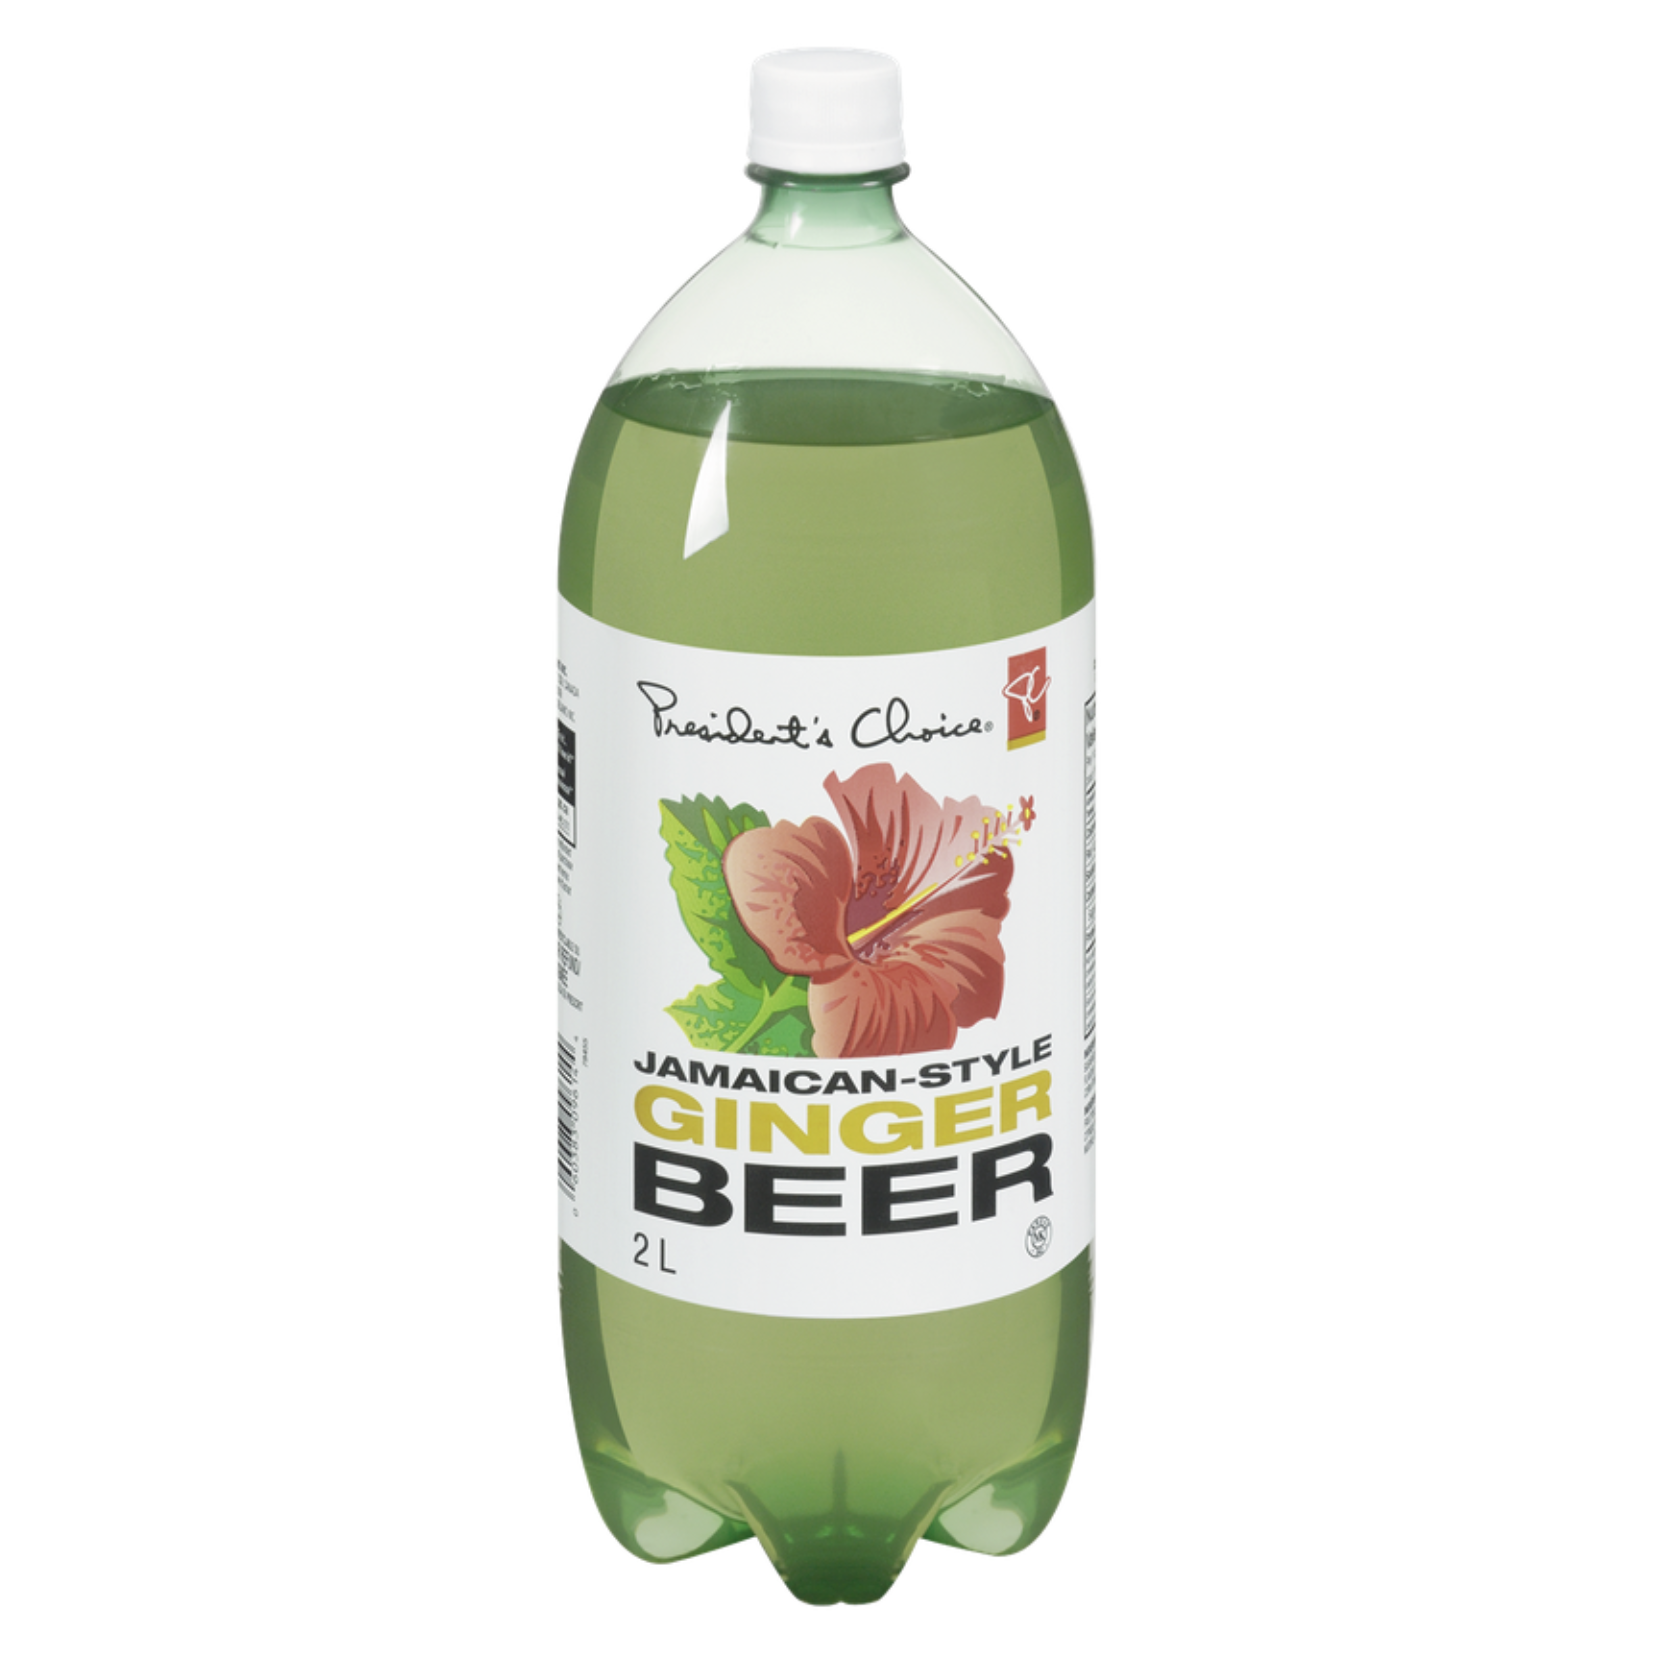 President's Choice Jamaican-Style Ginger Beer 2L